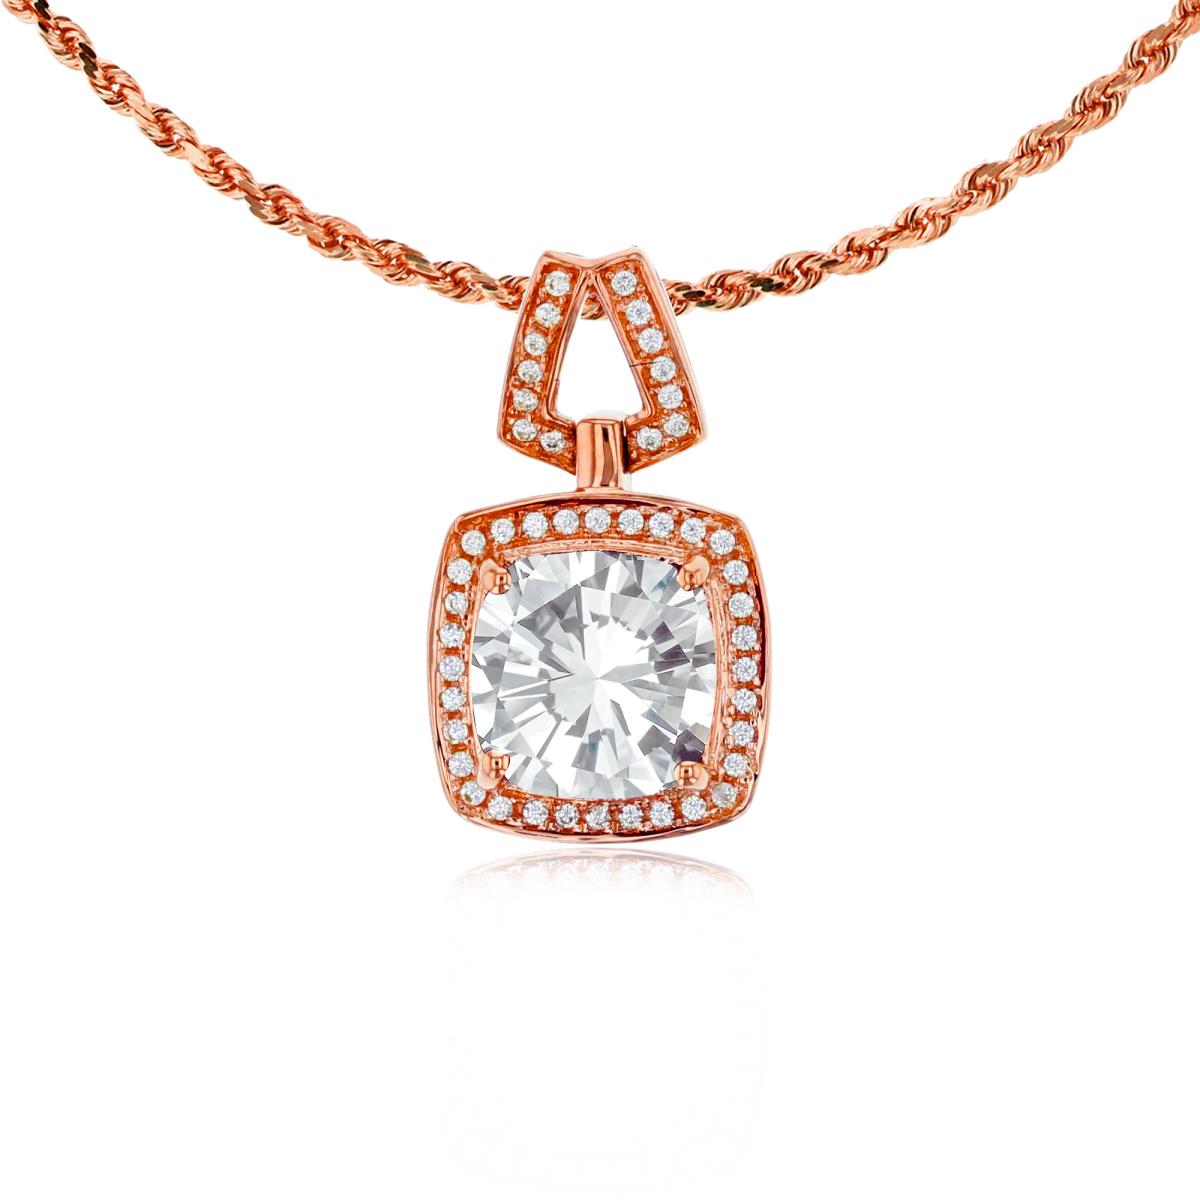 10K Rose Gold 7mm Cushion White Topaz & 0.10 CTTW Diamond Halo 18" Rope Chain Necklace